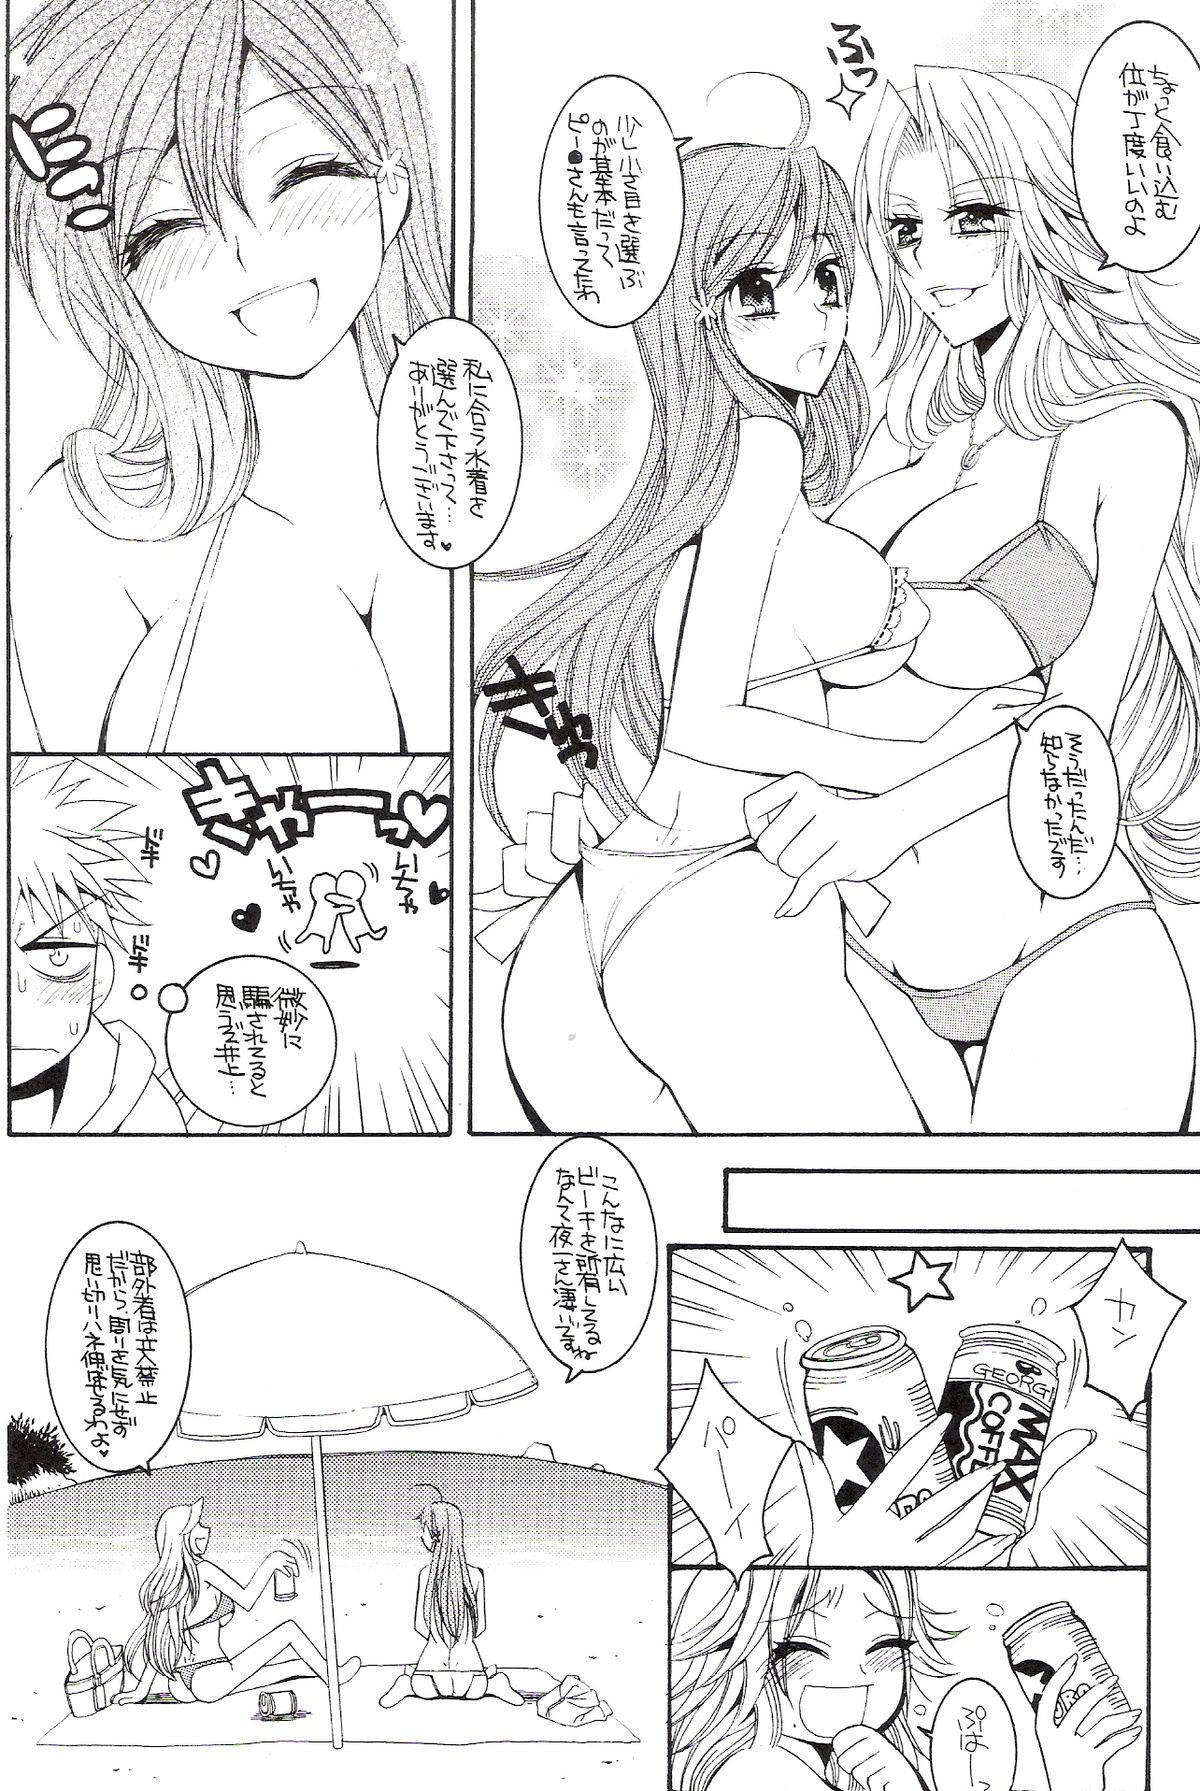 Animation CHICK CHICK CHICK - Bleach Amateur Blowjob - Page 5